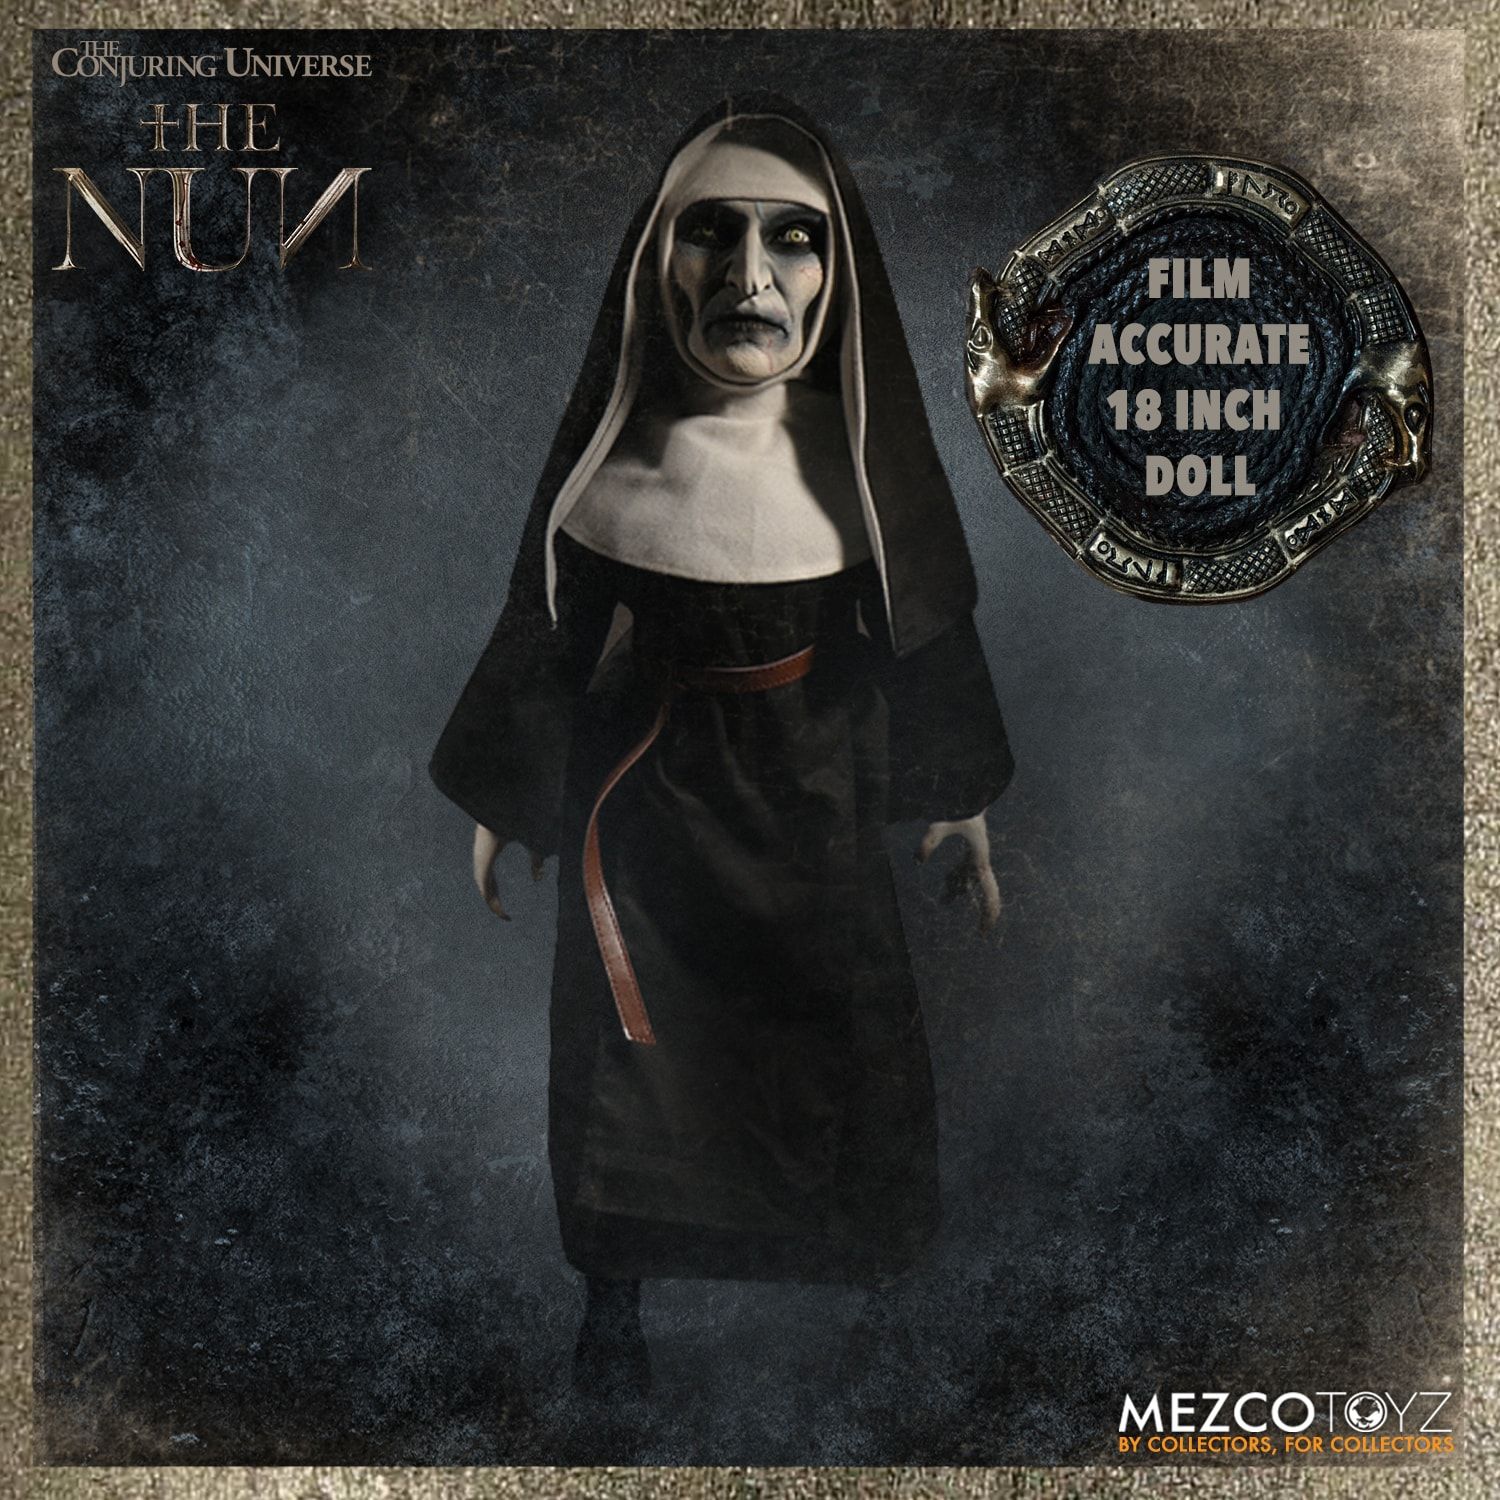 Mezco - The Conjuring Universe - The Nun Doll - Marvelous Toys